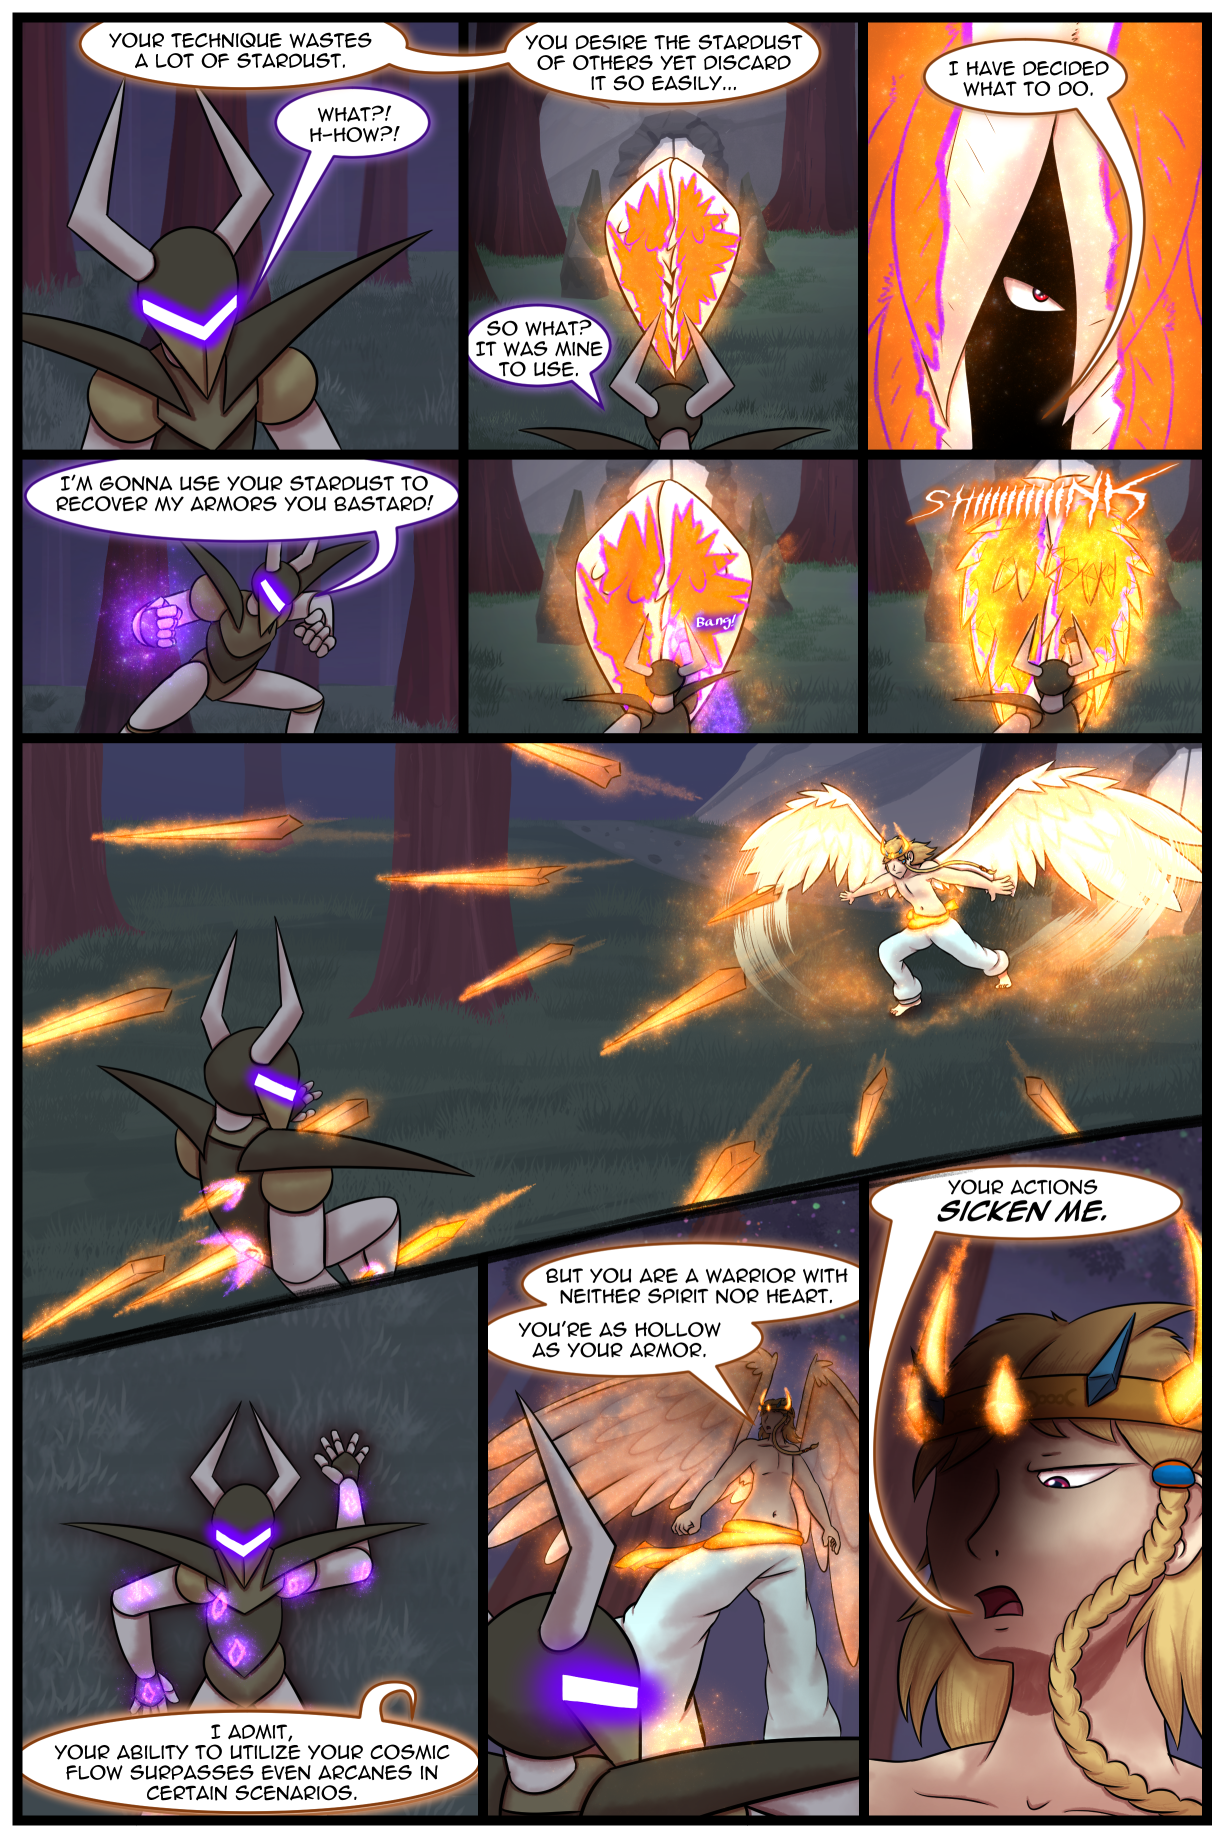 Ch5 Page 23 – Undefeatable